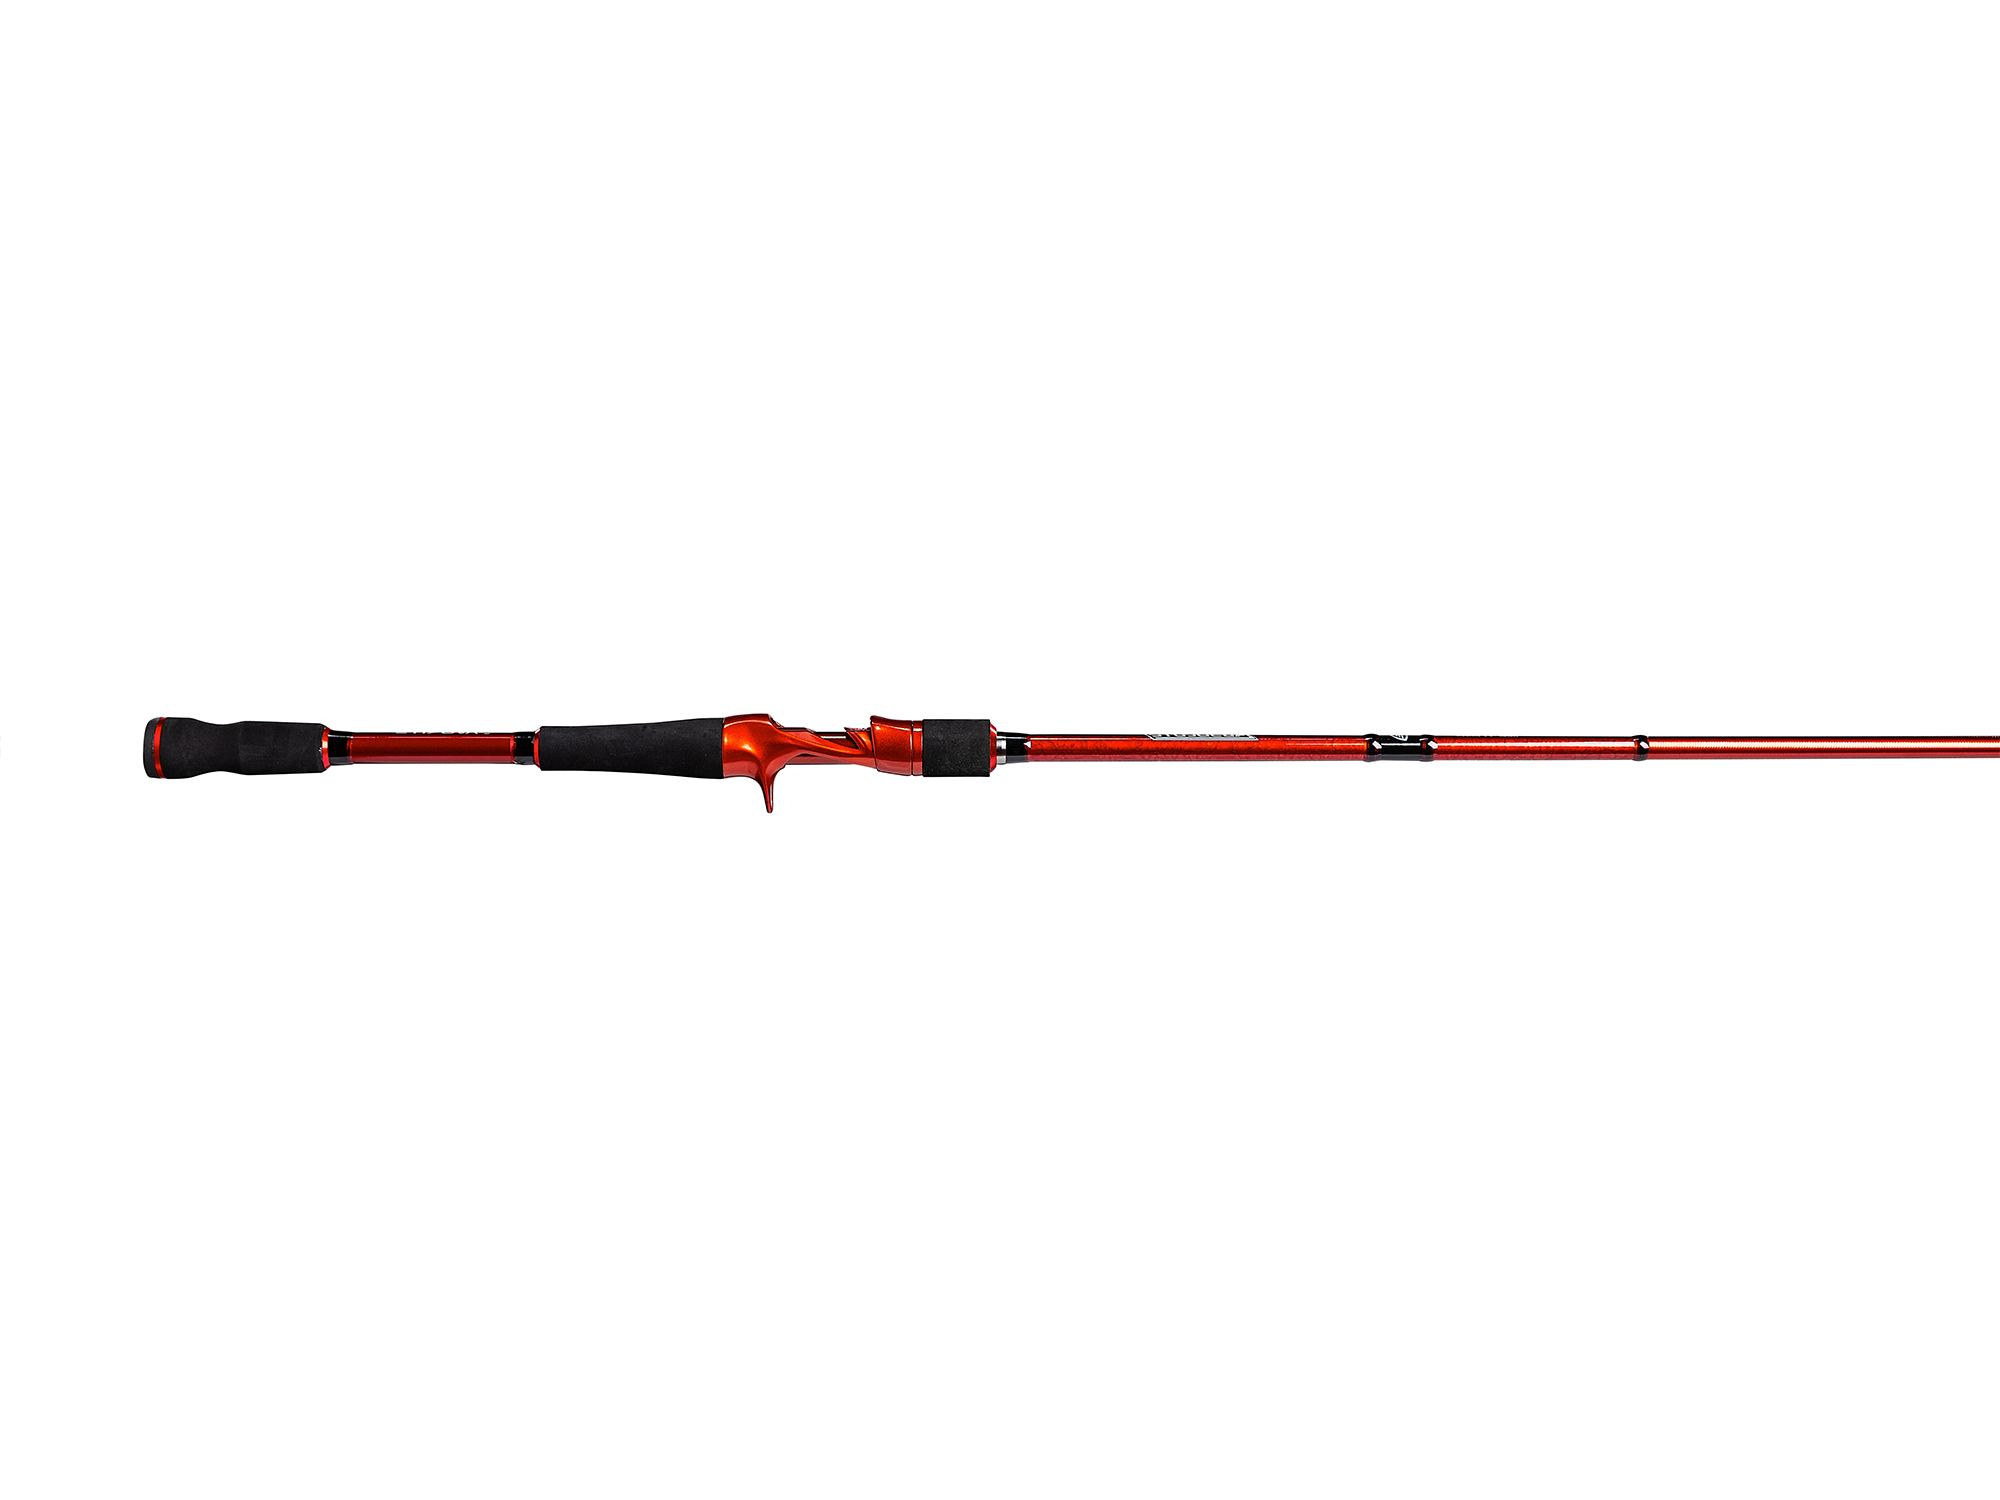 Favorite Fishing Absolute Casting Rod